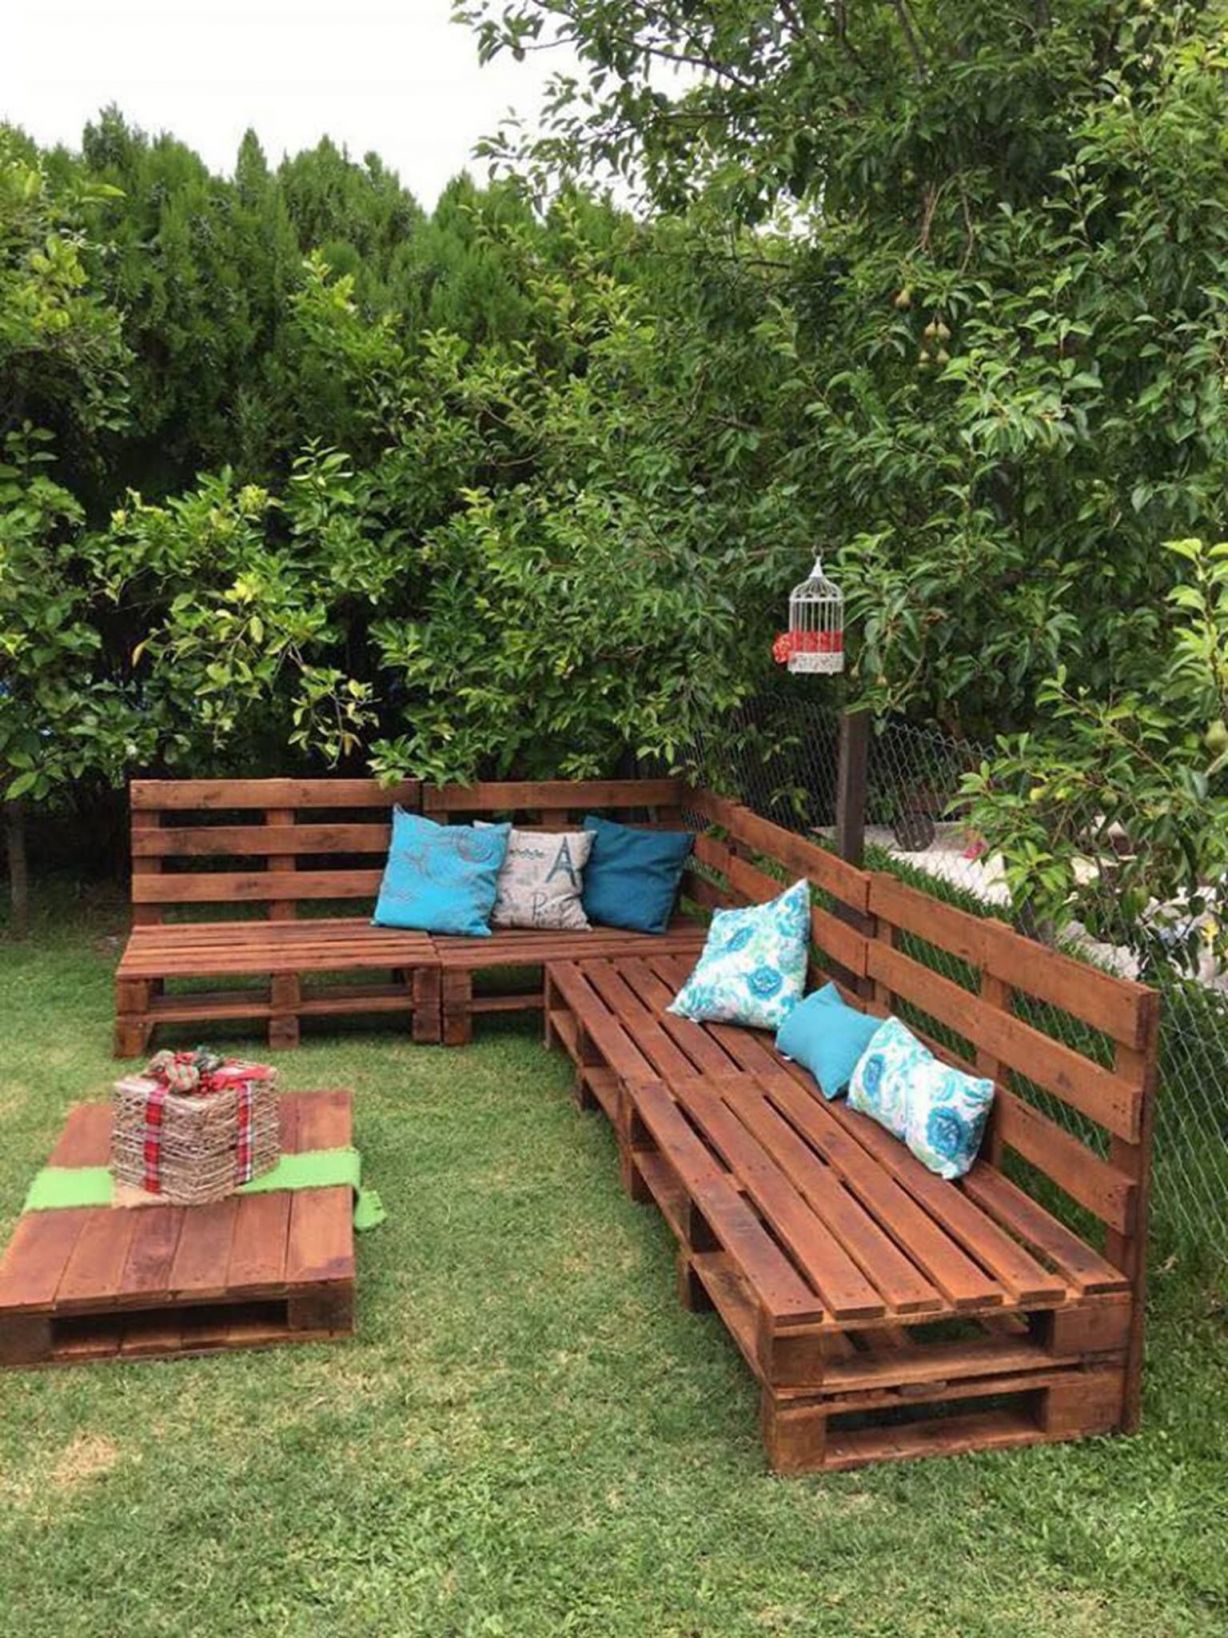  Adorable pallet ideas for outdoors 